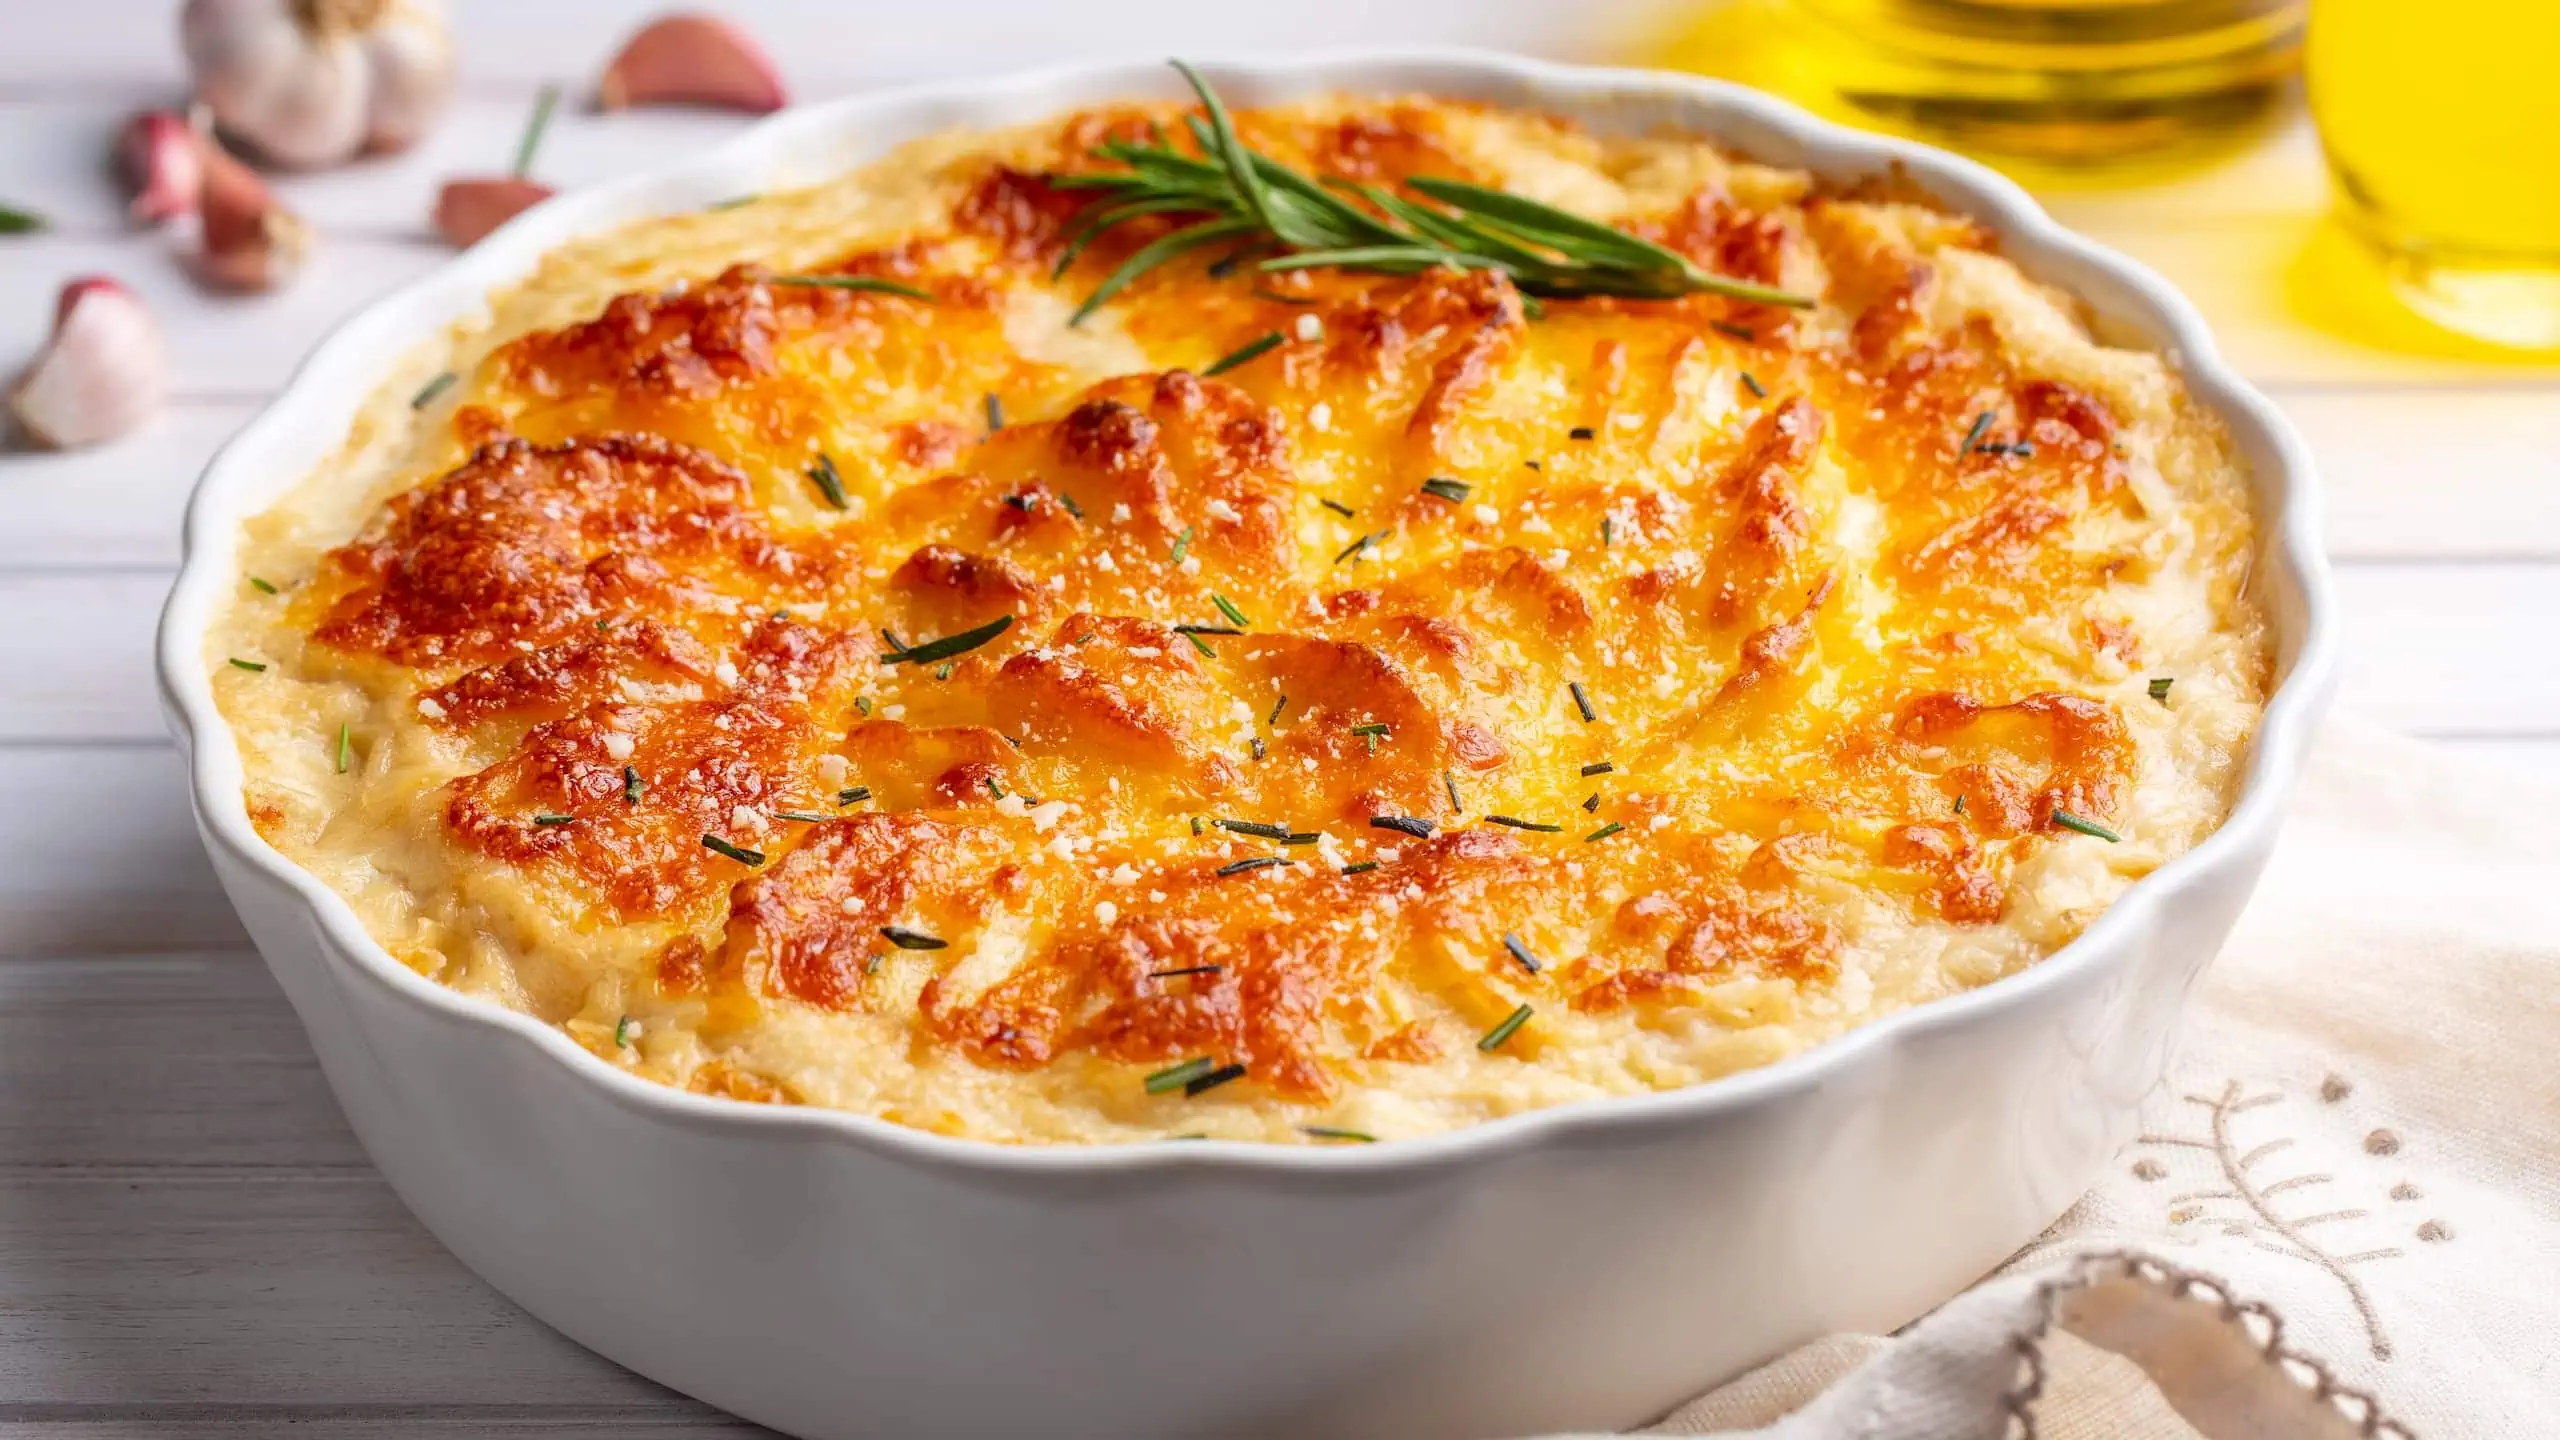 Our recipe for crabmeat casserole with garlic and onion